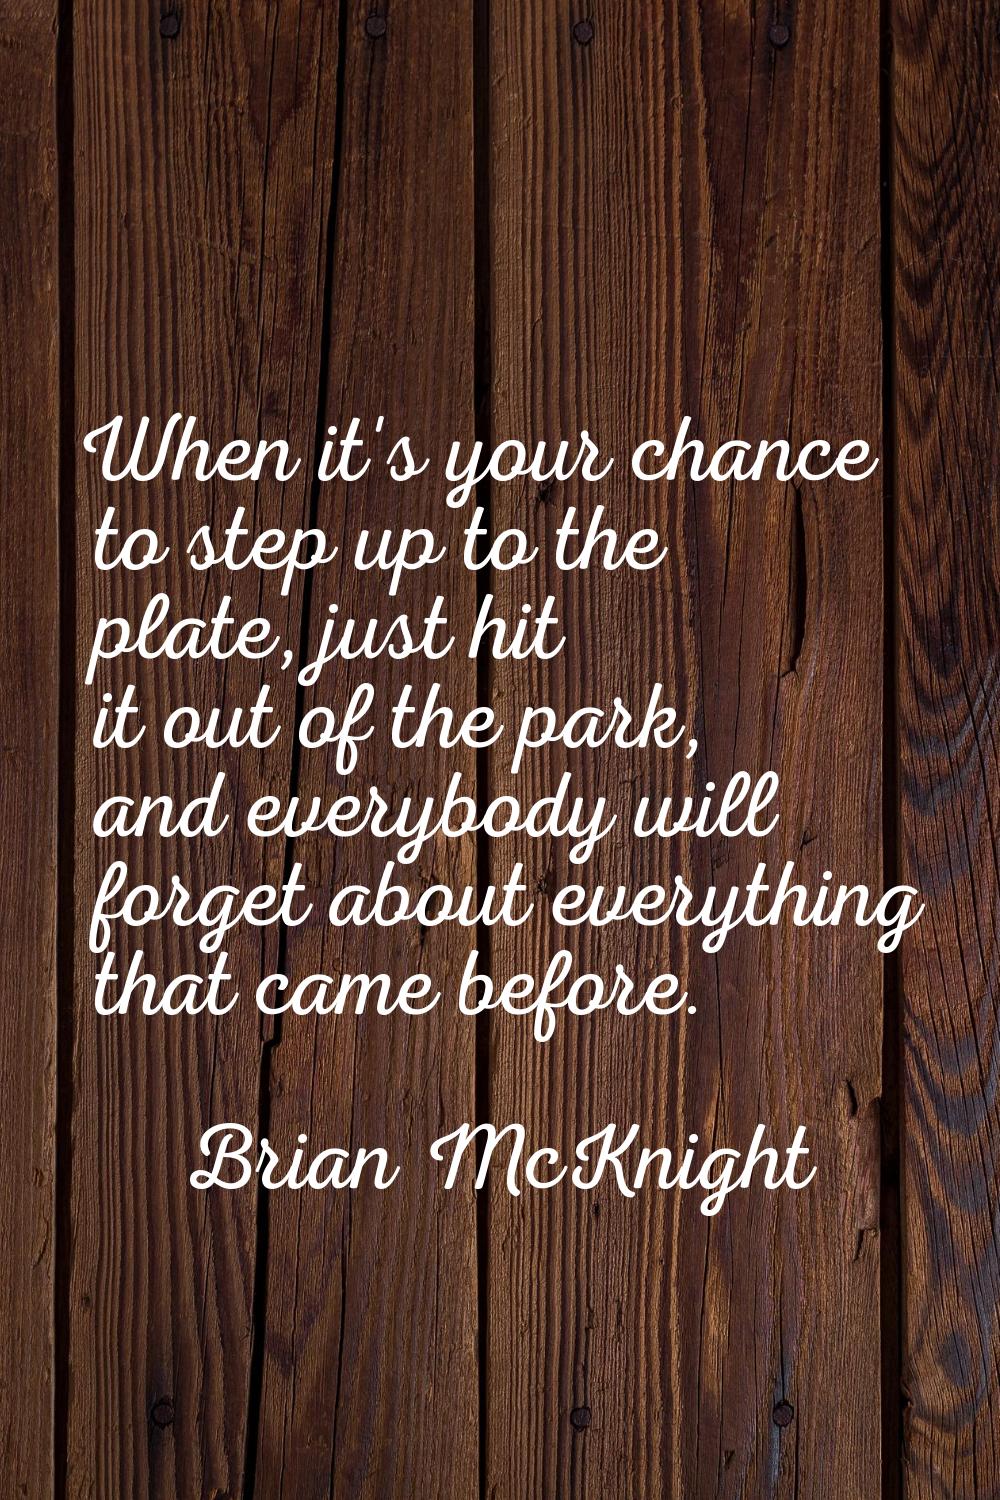 When it's your chance to step up to the plate, just hit it out of the park, and everybody will forg